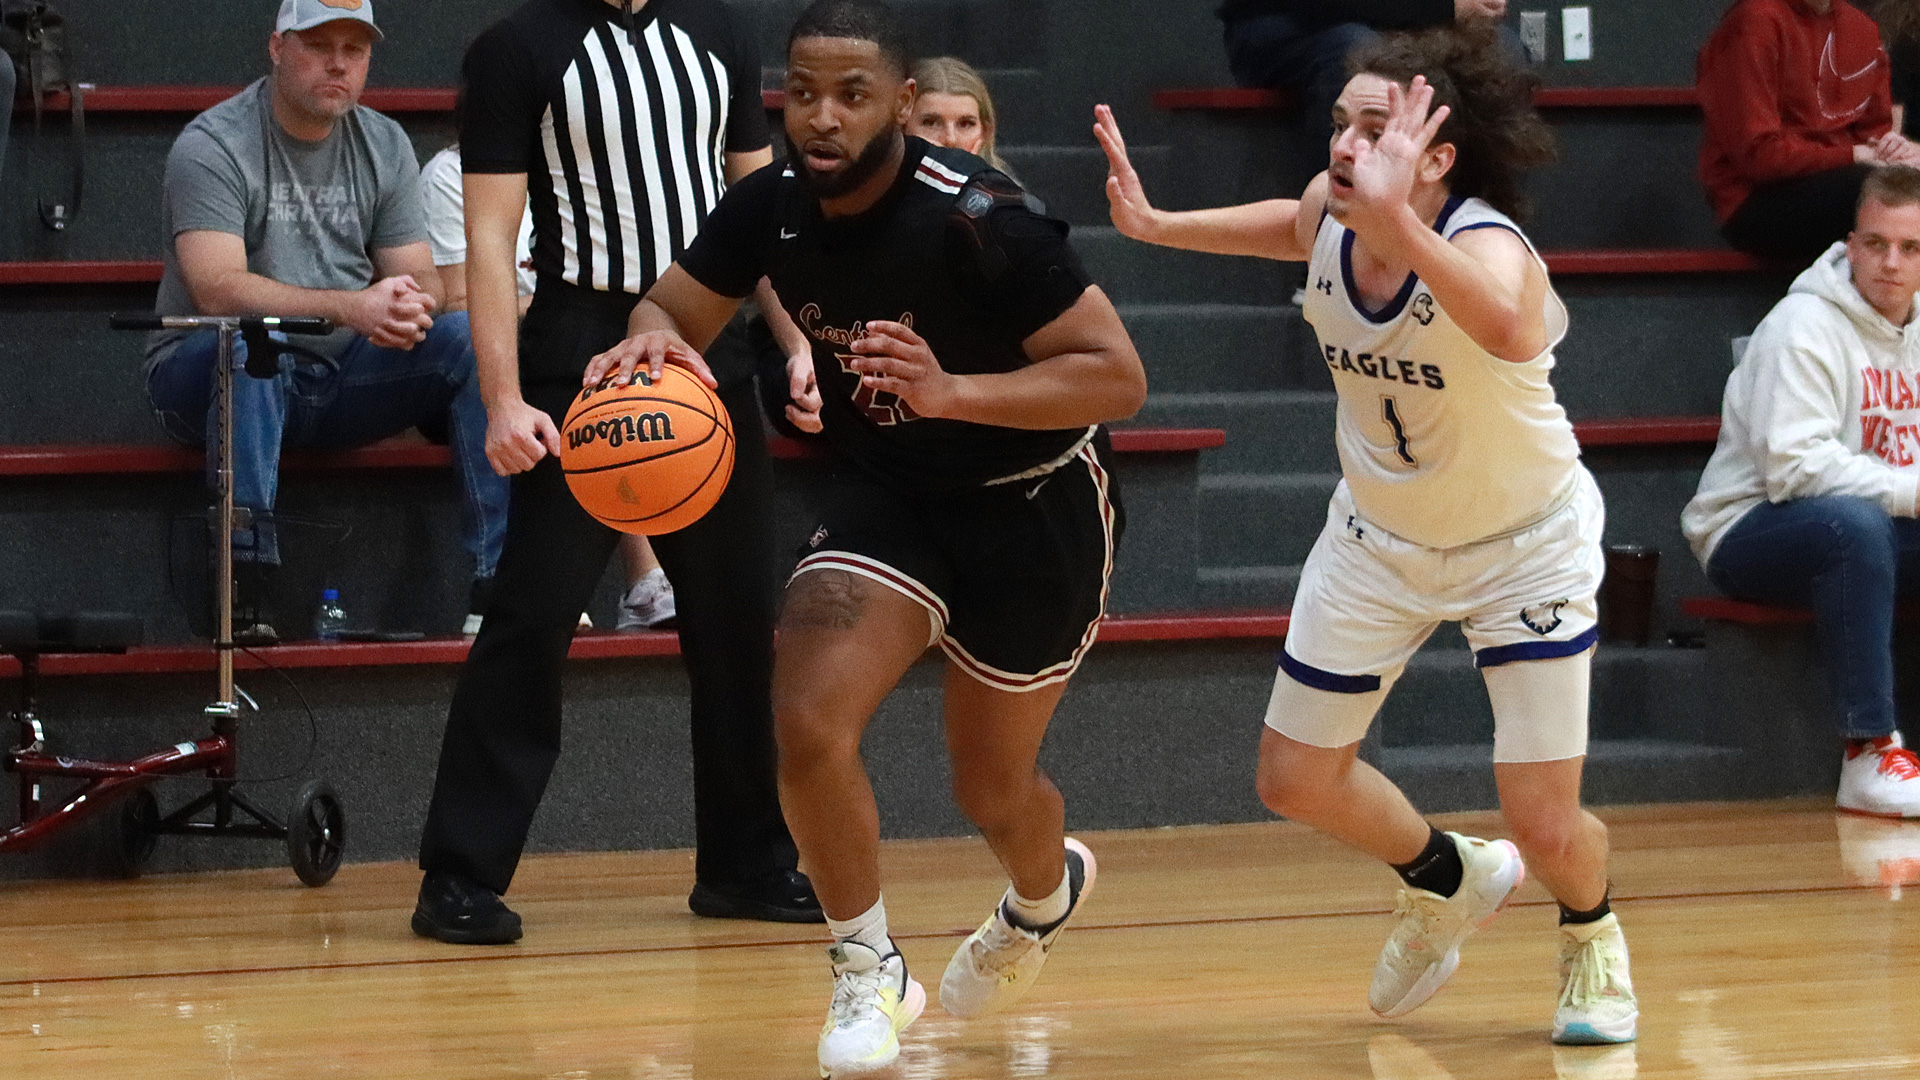 CCCB junior Sam Adams scored nine points, including five that were crucial during the last 1:11 of the Saints' 99-98 double-overtime win over Emmaus Bible College on Saturday.